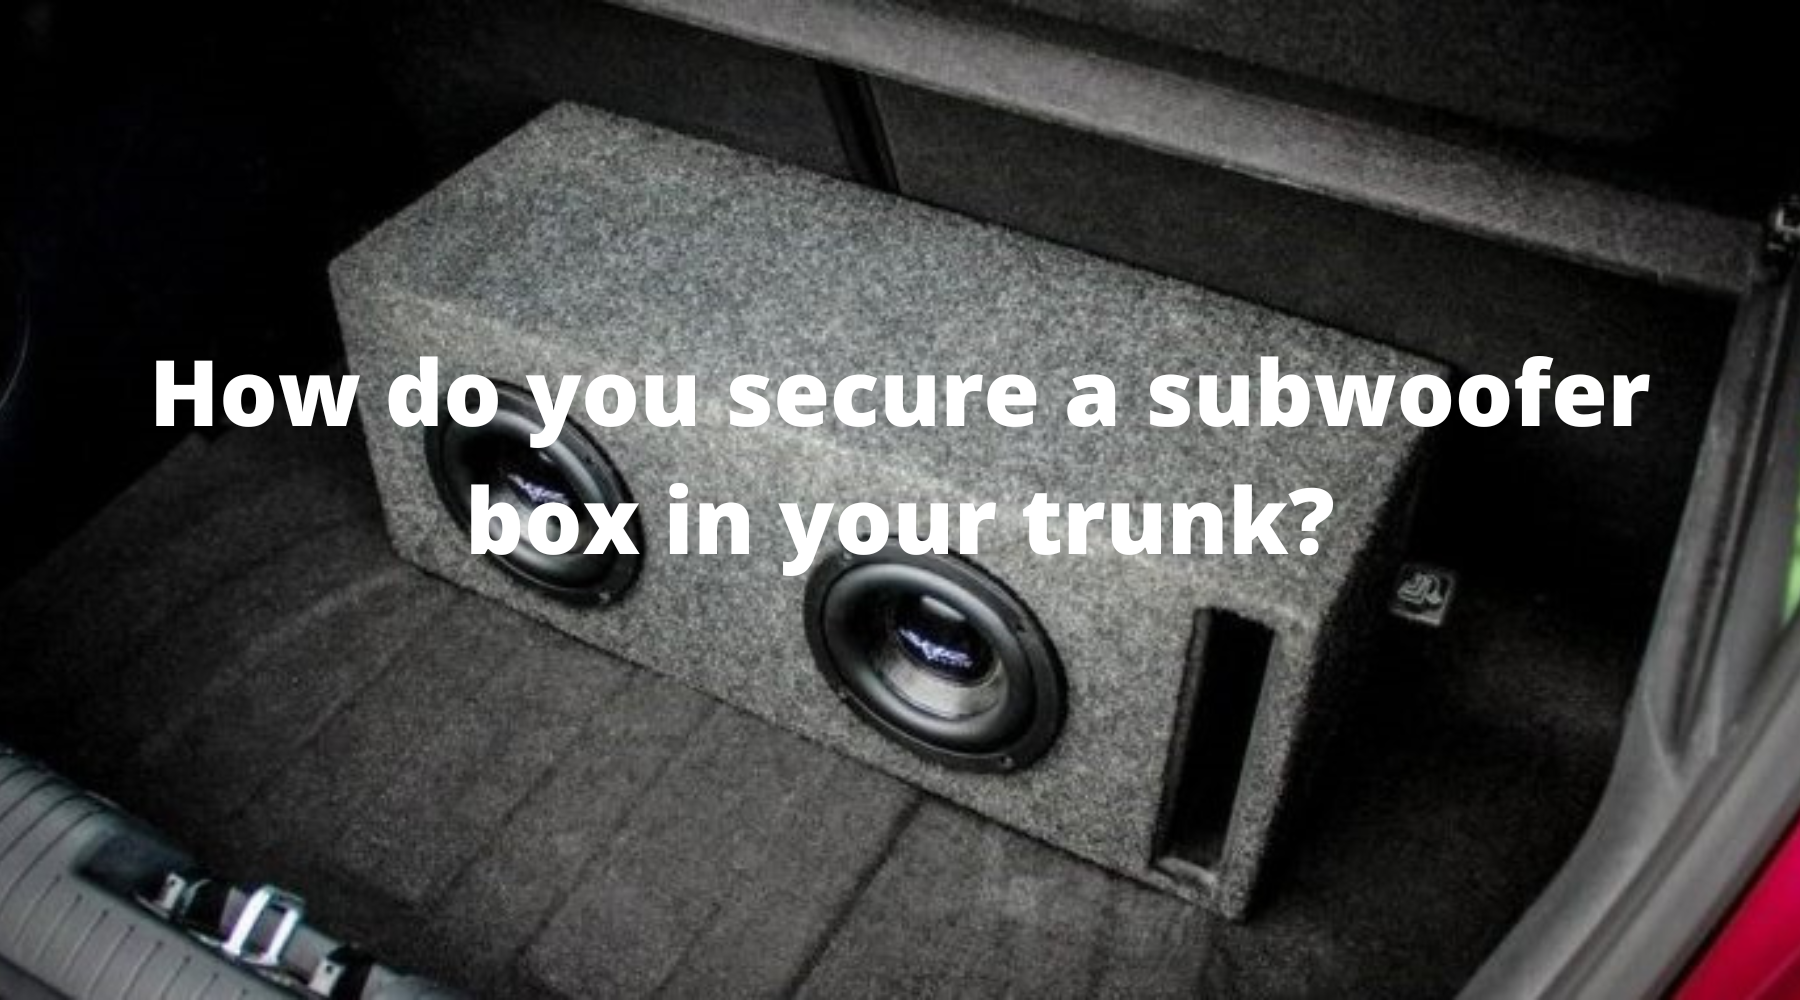 How do you secure a subwoofer box in your trunk?